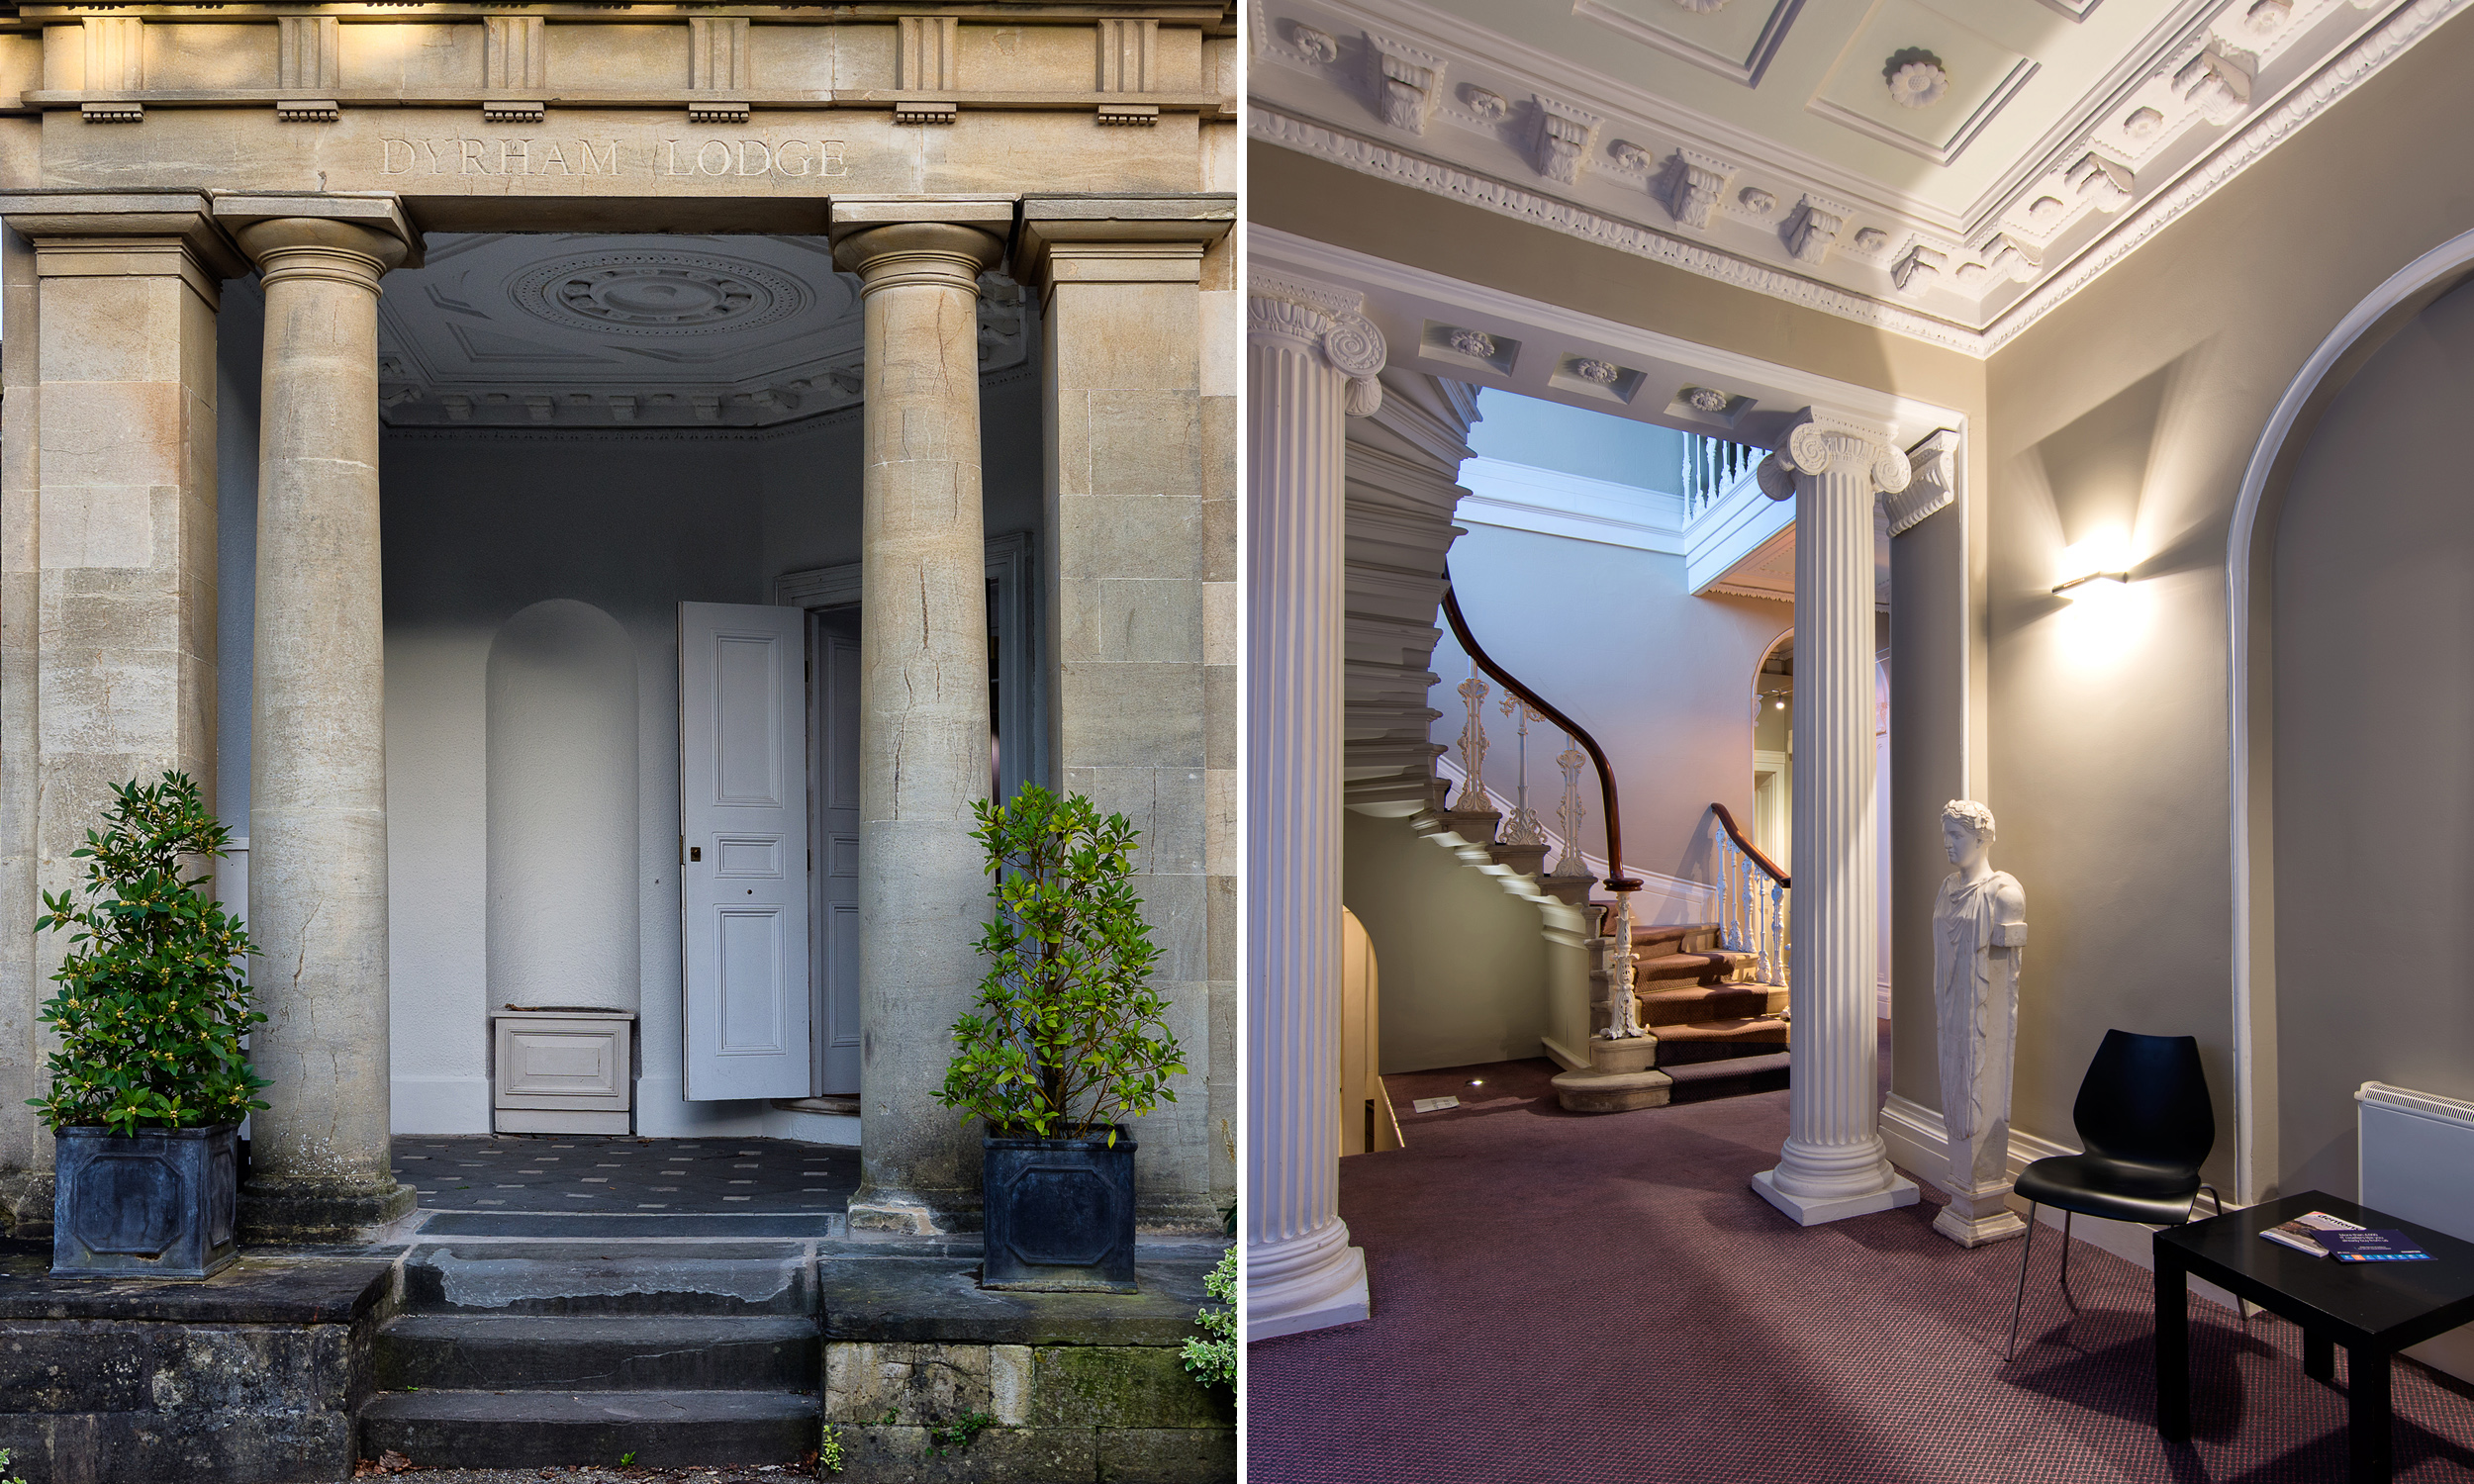 Entrance and entrance hall at Dyrham Lodge Offices